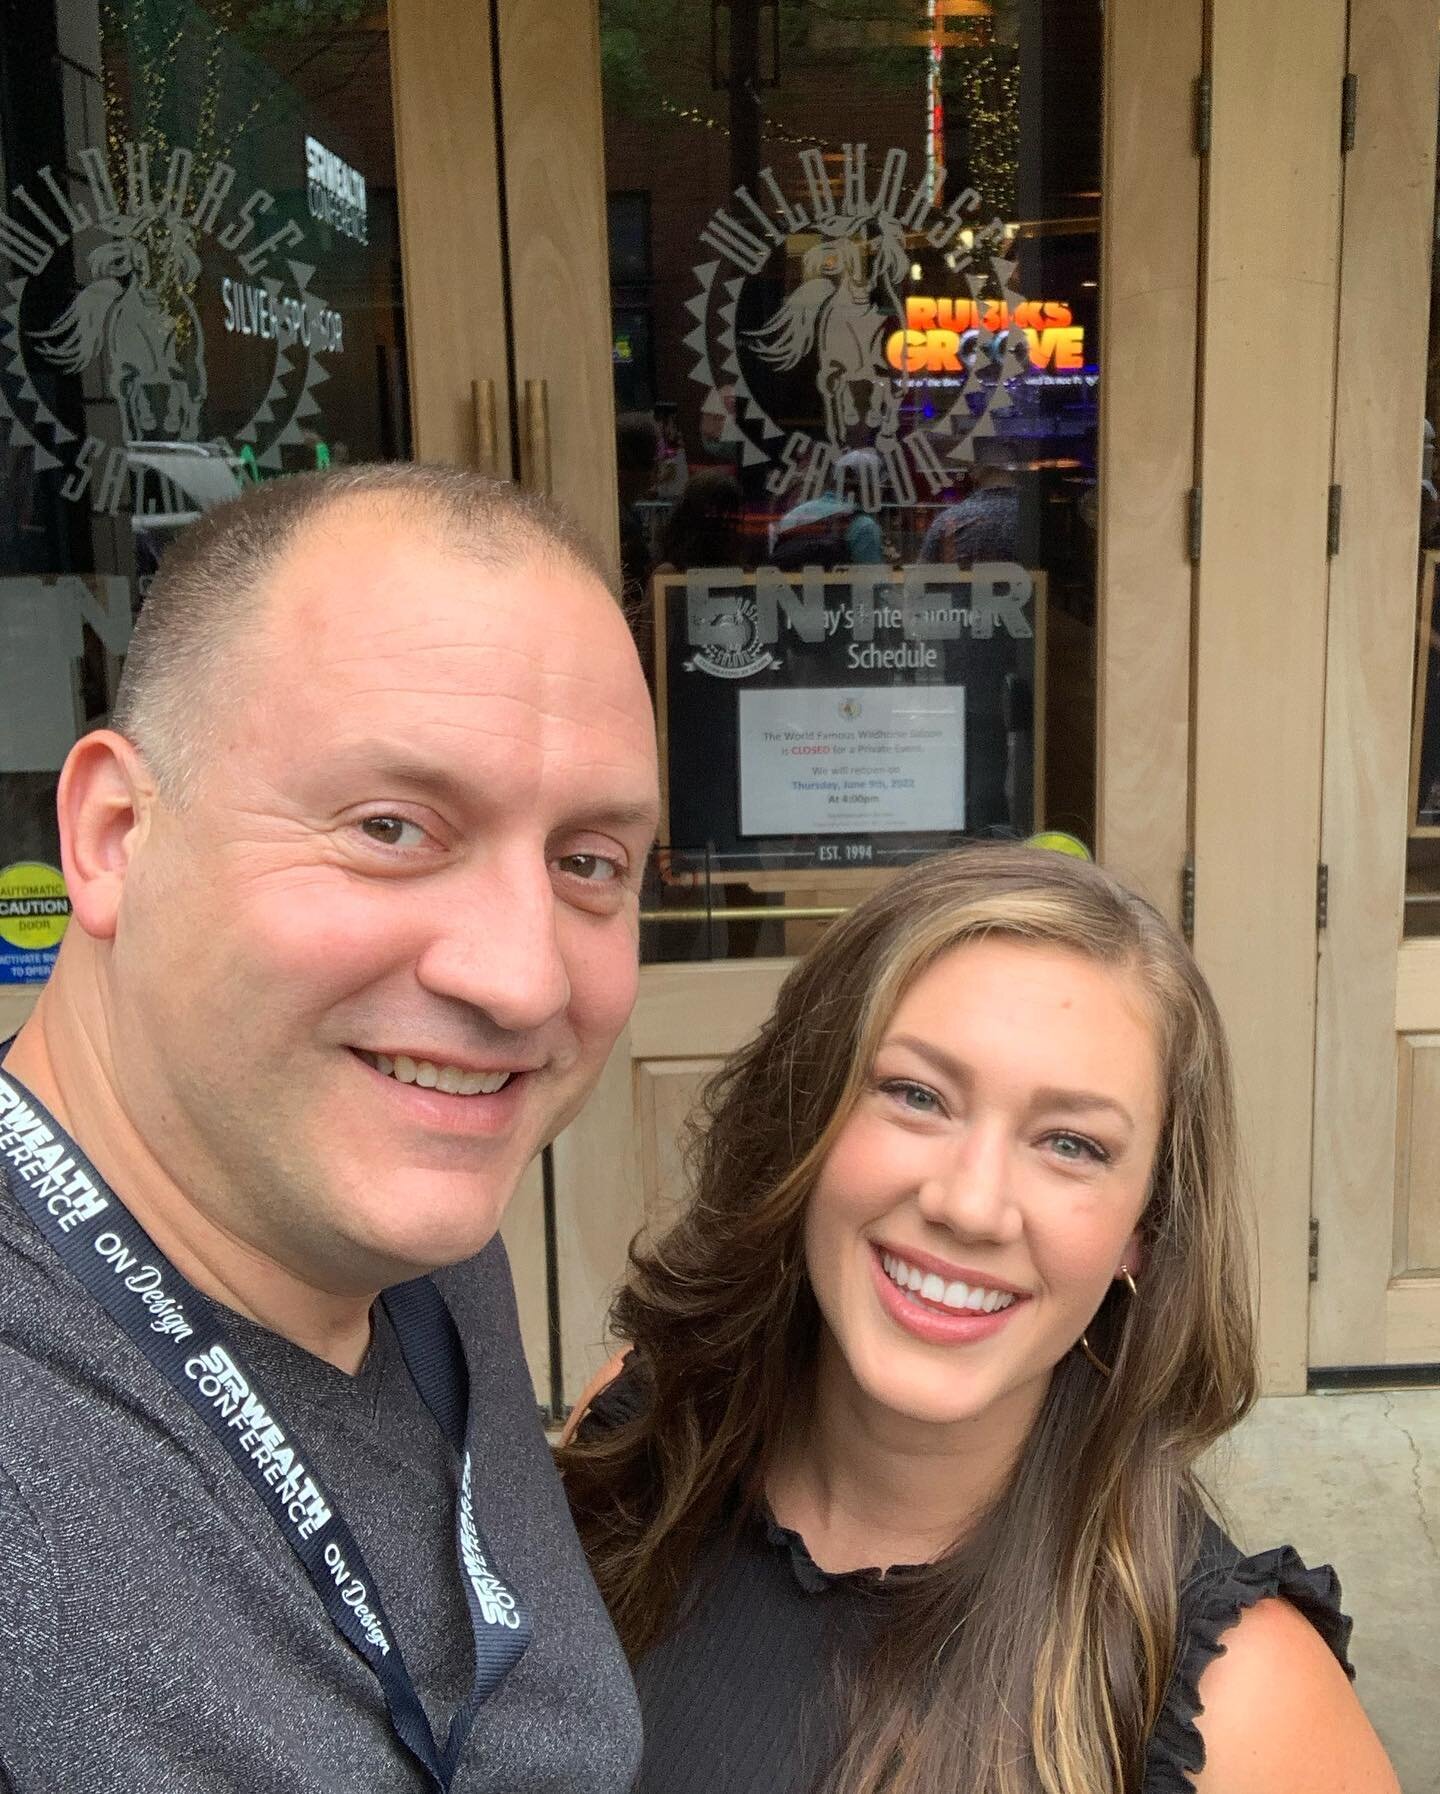 We attended the @strwealthcon last year &amp; we loved it! The community is top notch. Amazing driven people, educational &amp; fun atmosphere downtown Nashville, @wildhorsesaloon . 
🐎June 2022
.
.
#strwealthconference #buildstrwealth #airbnbsuperho